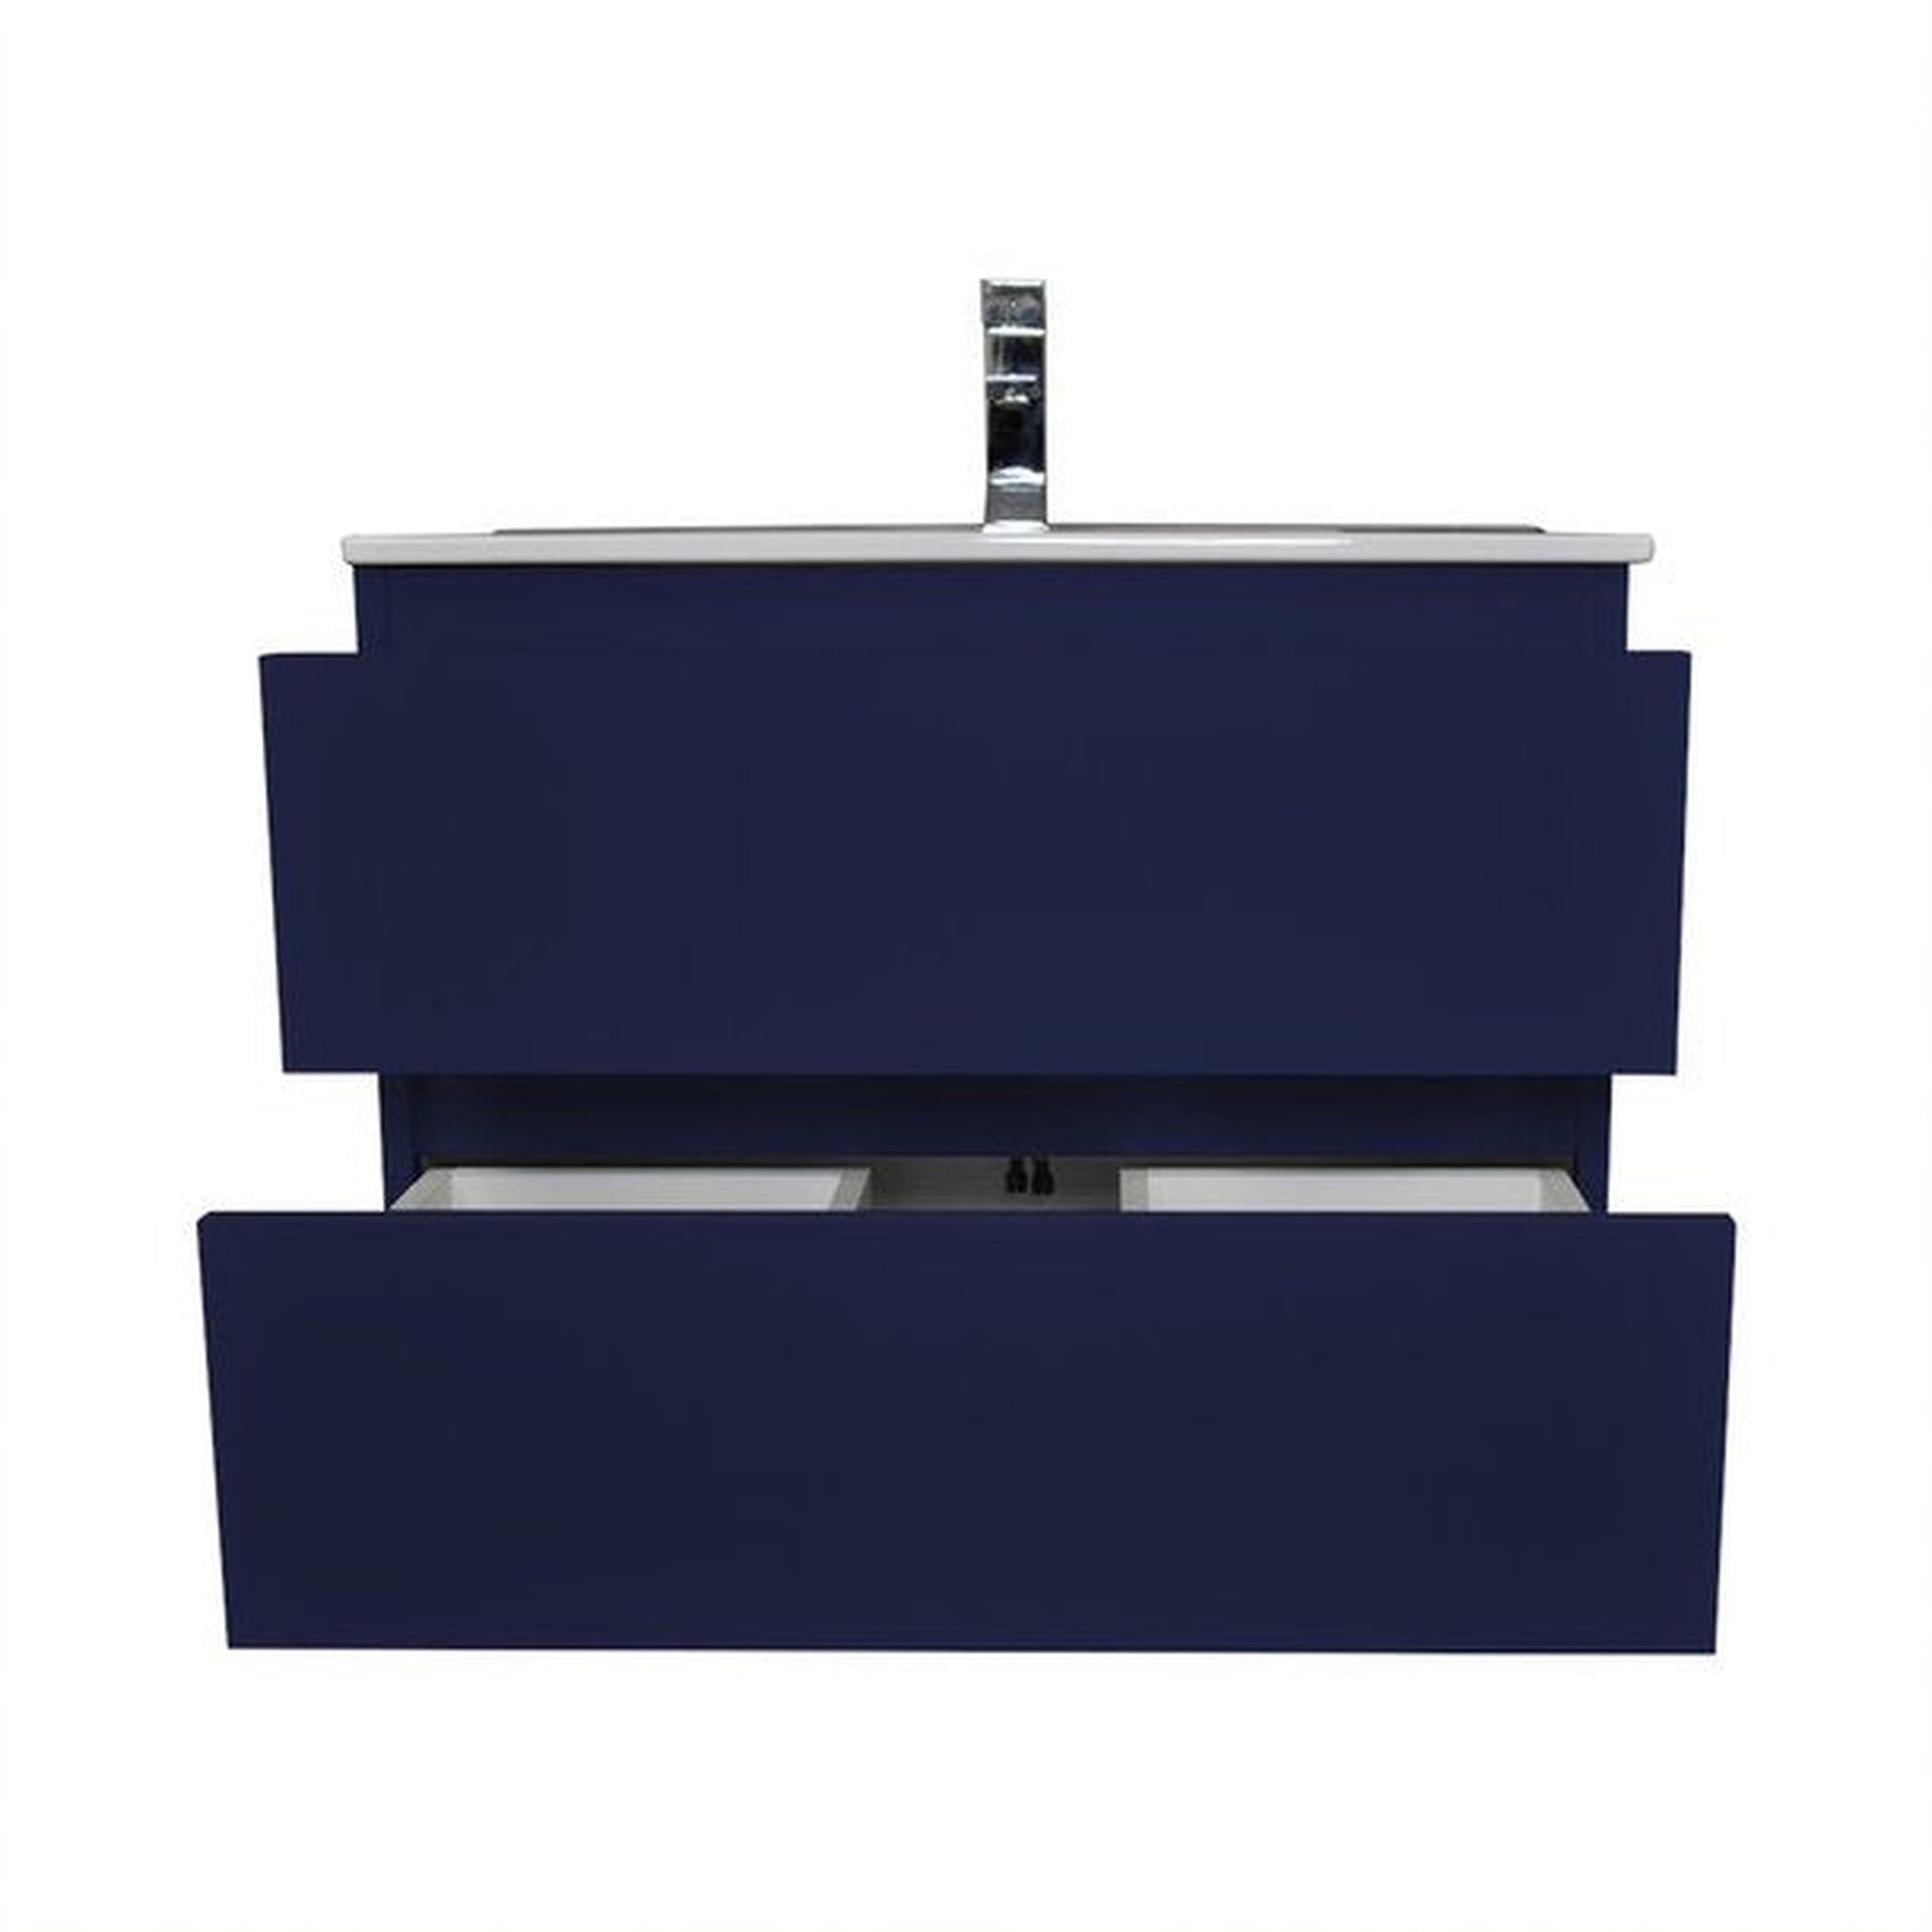 Volpa USA Salt 24" x 18" Navy Wall-Mounted Floating Bathroom Vanity With Drawers, Integrated Porcelain Ceramic Top and Integrated Ceramic Sink